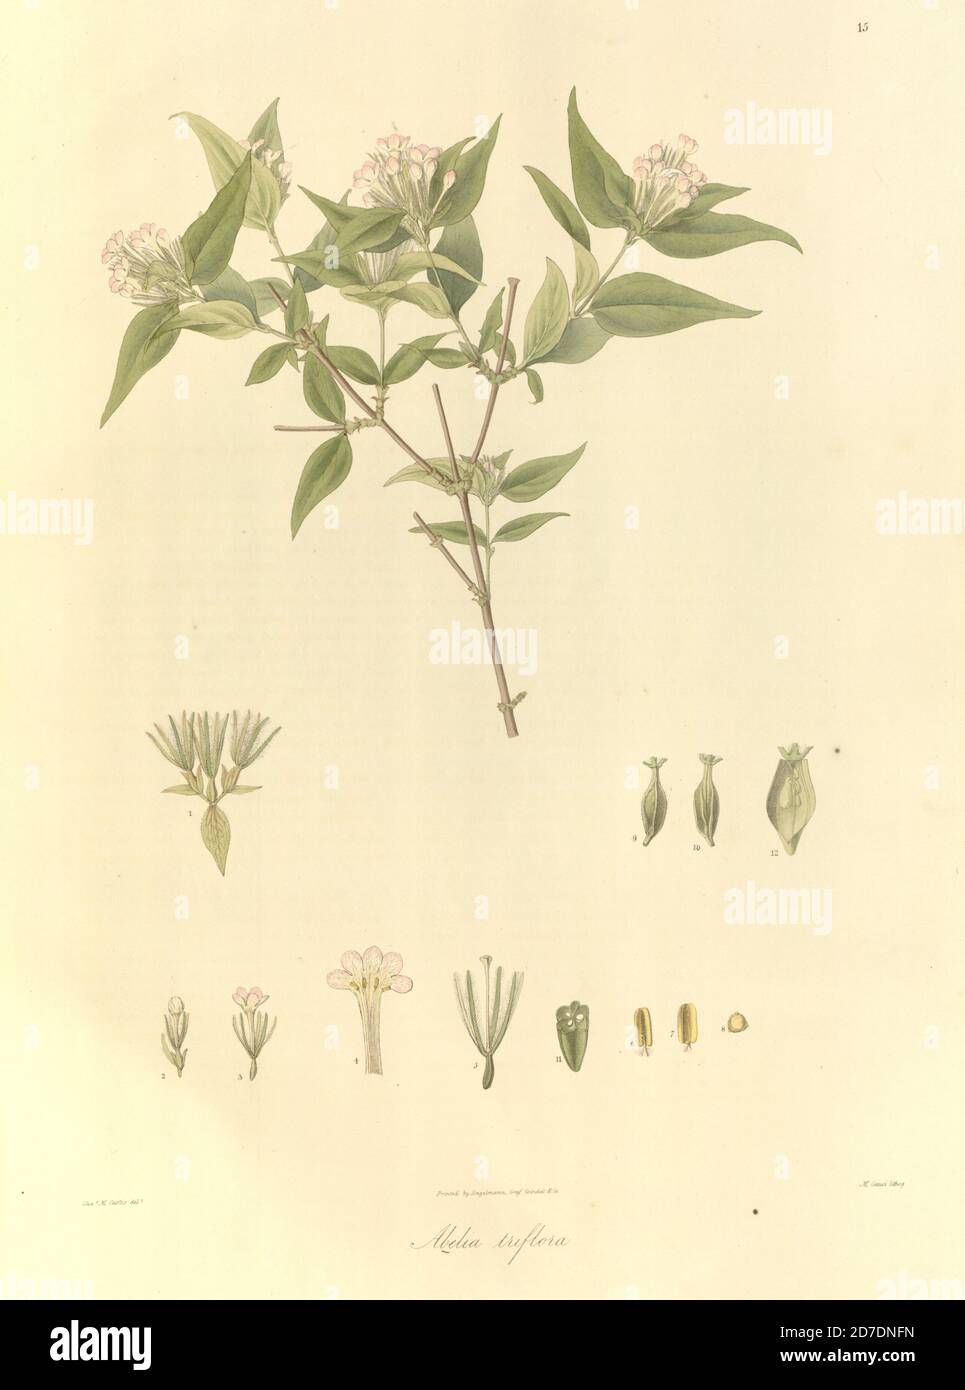 Abelia triflora From Plantae Asiaticae rariores, or, Descriptions and figures of a select number of unpublished East Indian plants Volume 1 by N. Wallich. Nathaniel Wolff Wallich FRS FRSE (28 January 1786 – 28 April 1854) was a surgeon and botanist of Danish origin who worked in India, initially in the Danish settlement near Calcutta and later for the Danish East India Company and the British East India Company. He was involved in the early development of the Calcutta Botanical Garden, describing many new plant species and developing a large herbarium collection which was distributed to collec Stock Photo